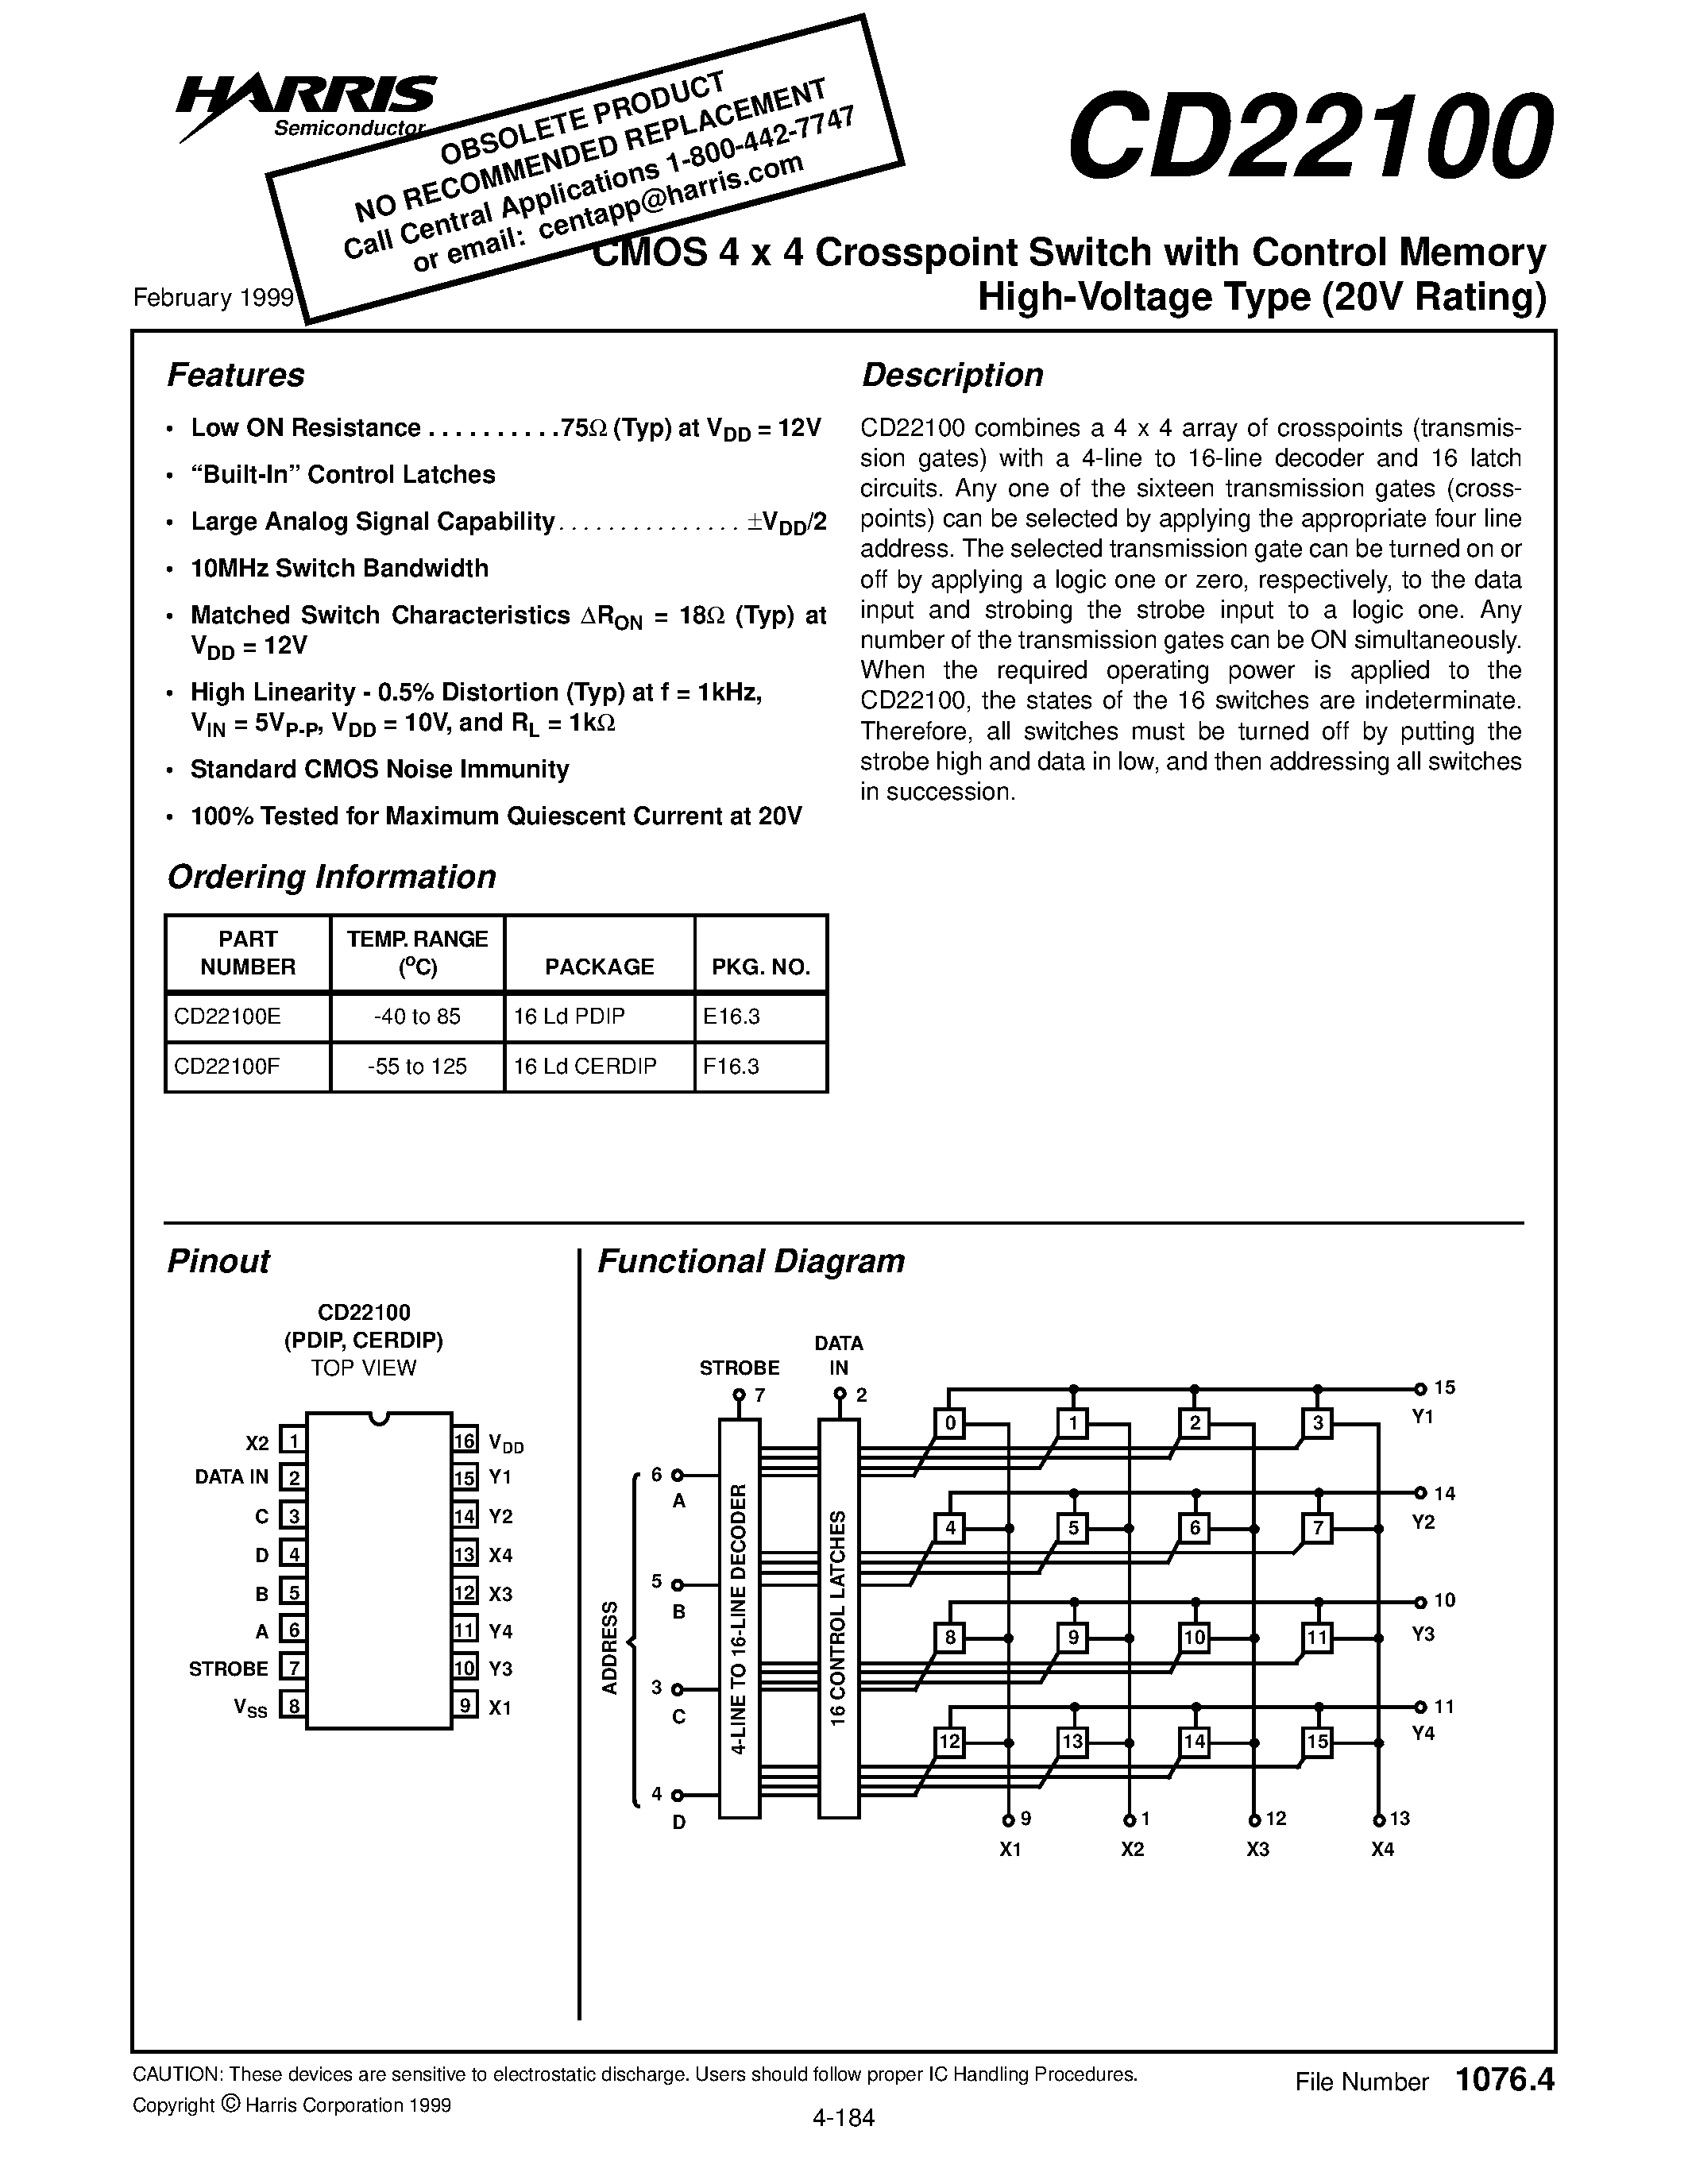 Datasheet CD22100 - CMOS 4 x 4 Crosspoint Switch with Control Memory High-Voltage Type (20V Rating) page 1